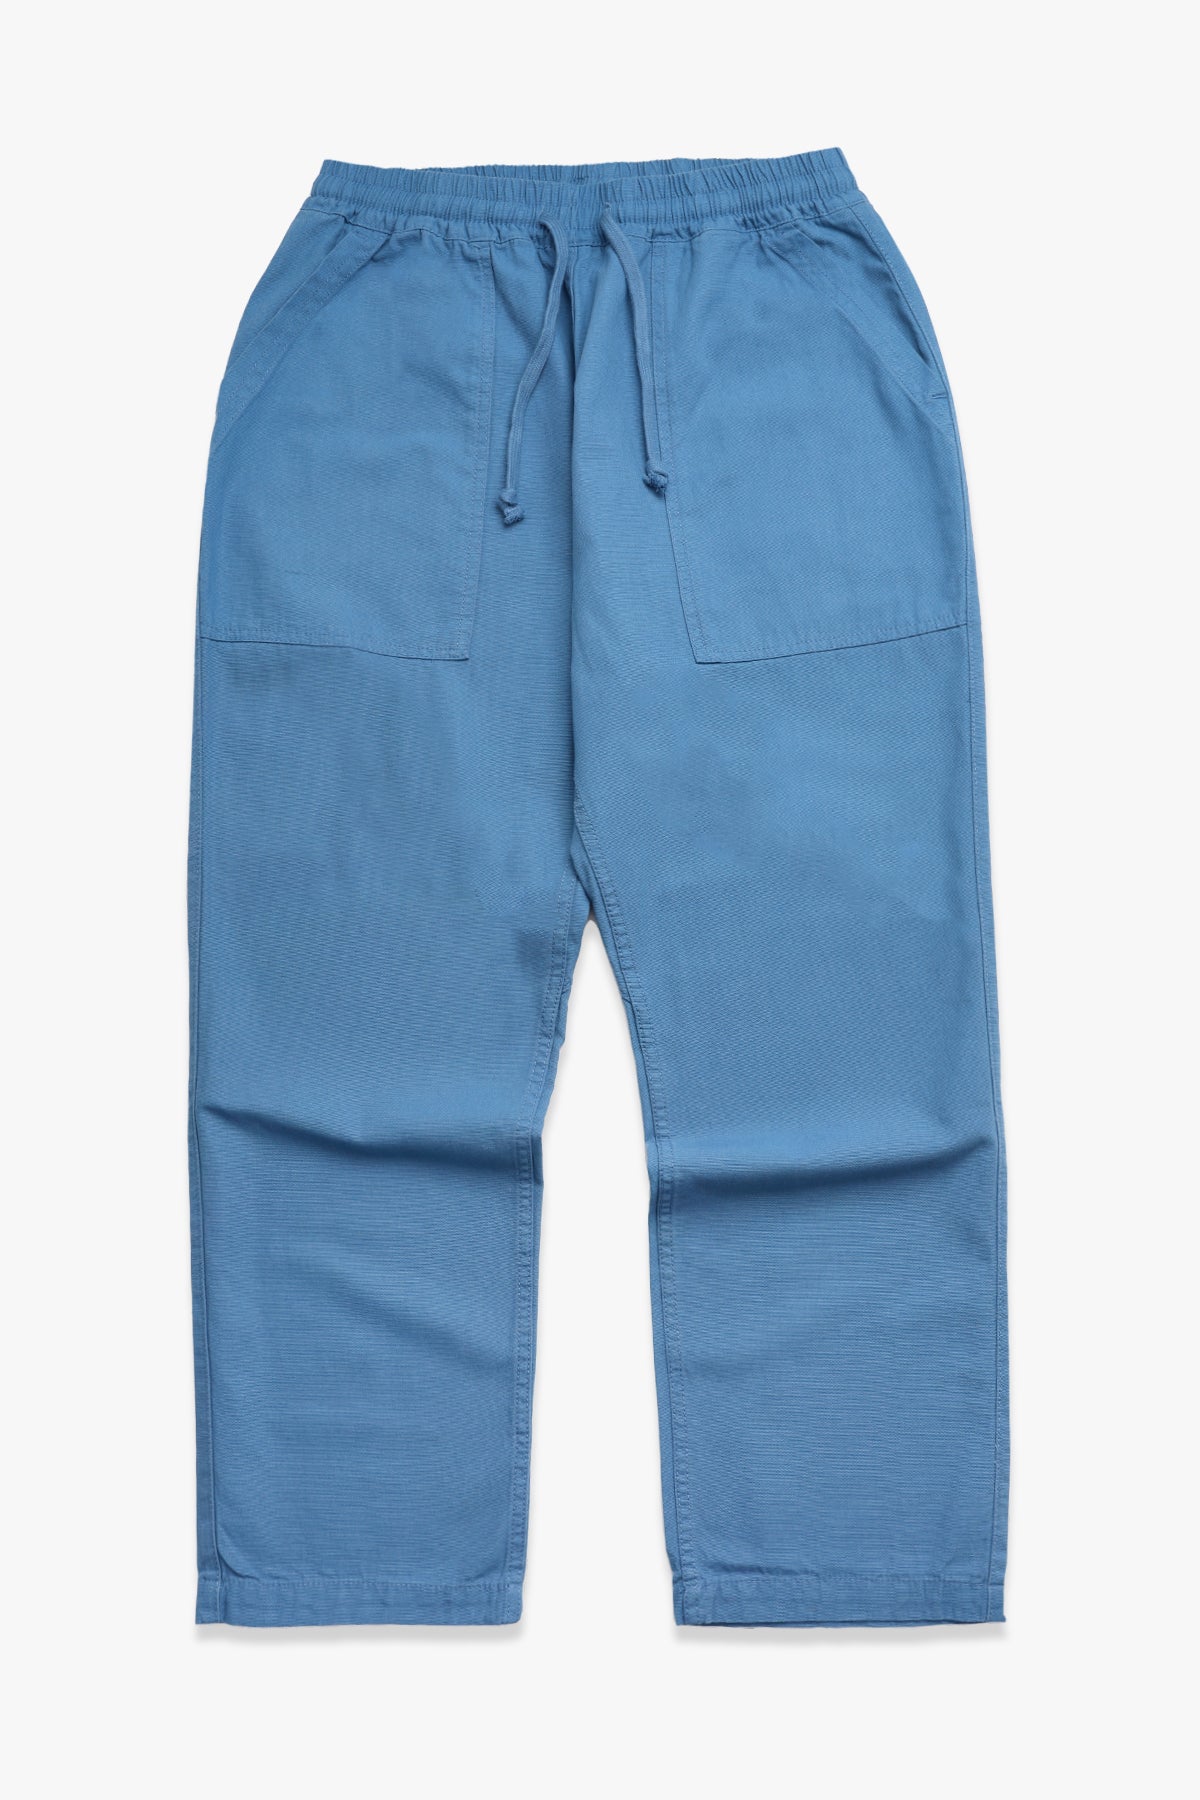 Service Works - Trade Chef Pants - Work Blue